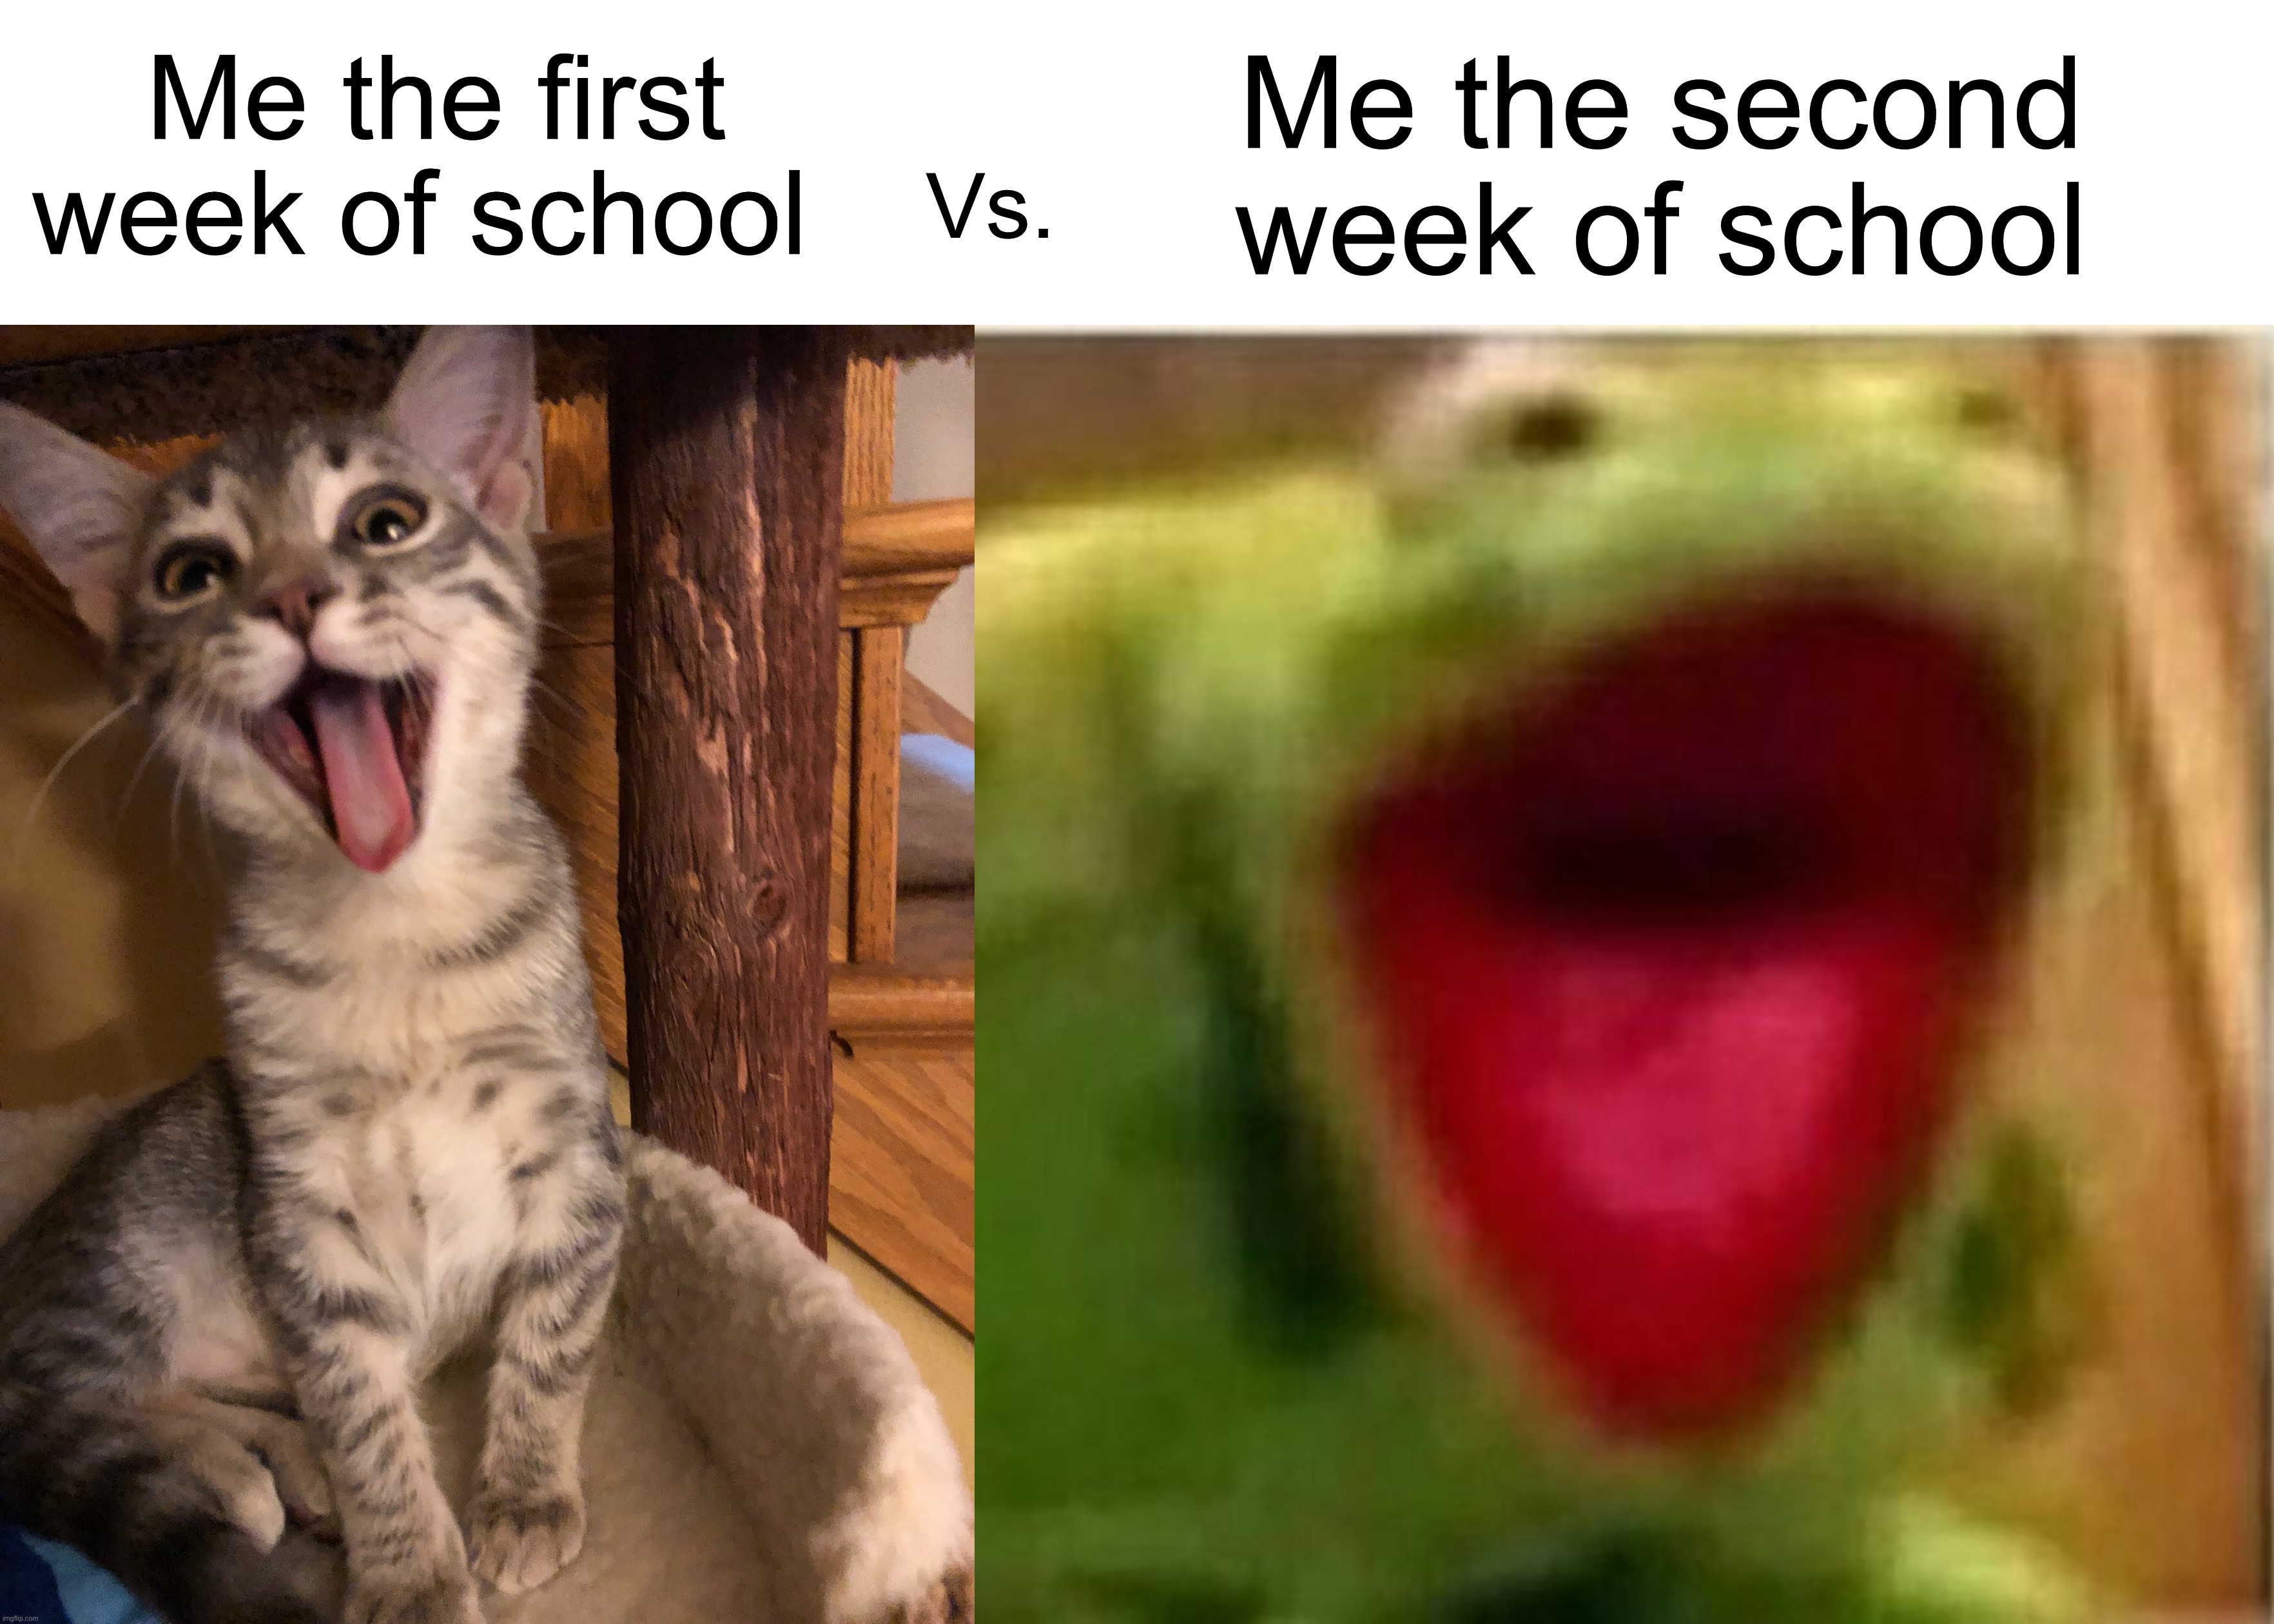 The second week is usually more painful than the first | Me the second week of school; Me the first week of school; Vs. | image tagged in ahhhhhhhhhhhhh,memes,funny,true story,relatable memes,school | made w/ Imgflip meme maker